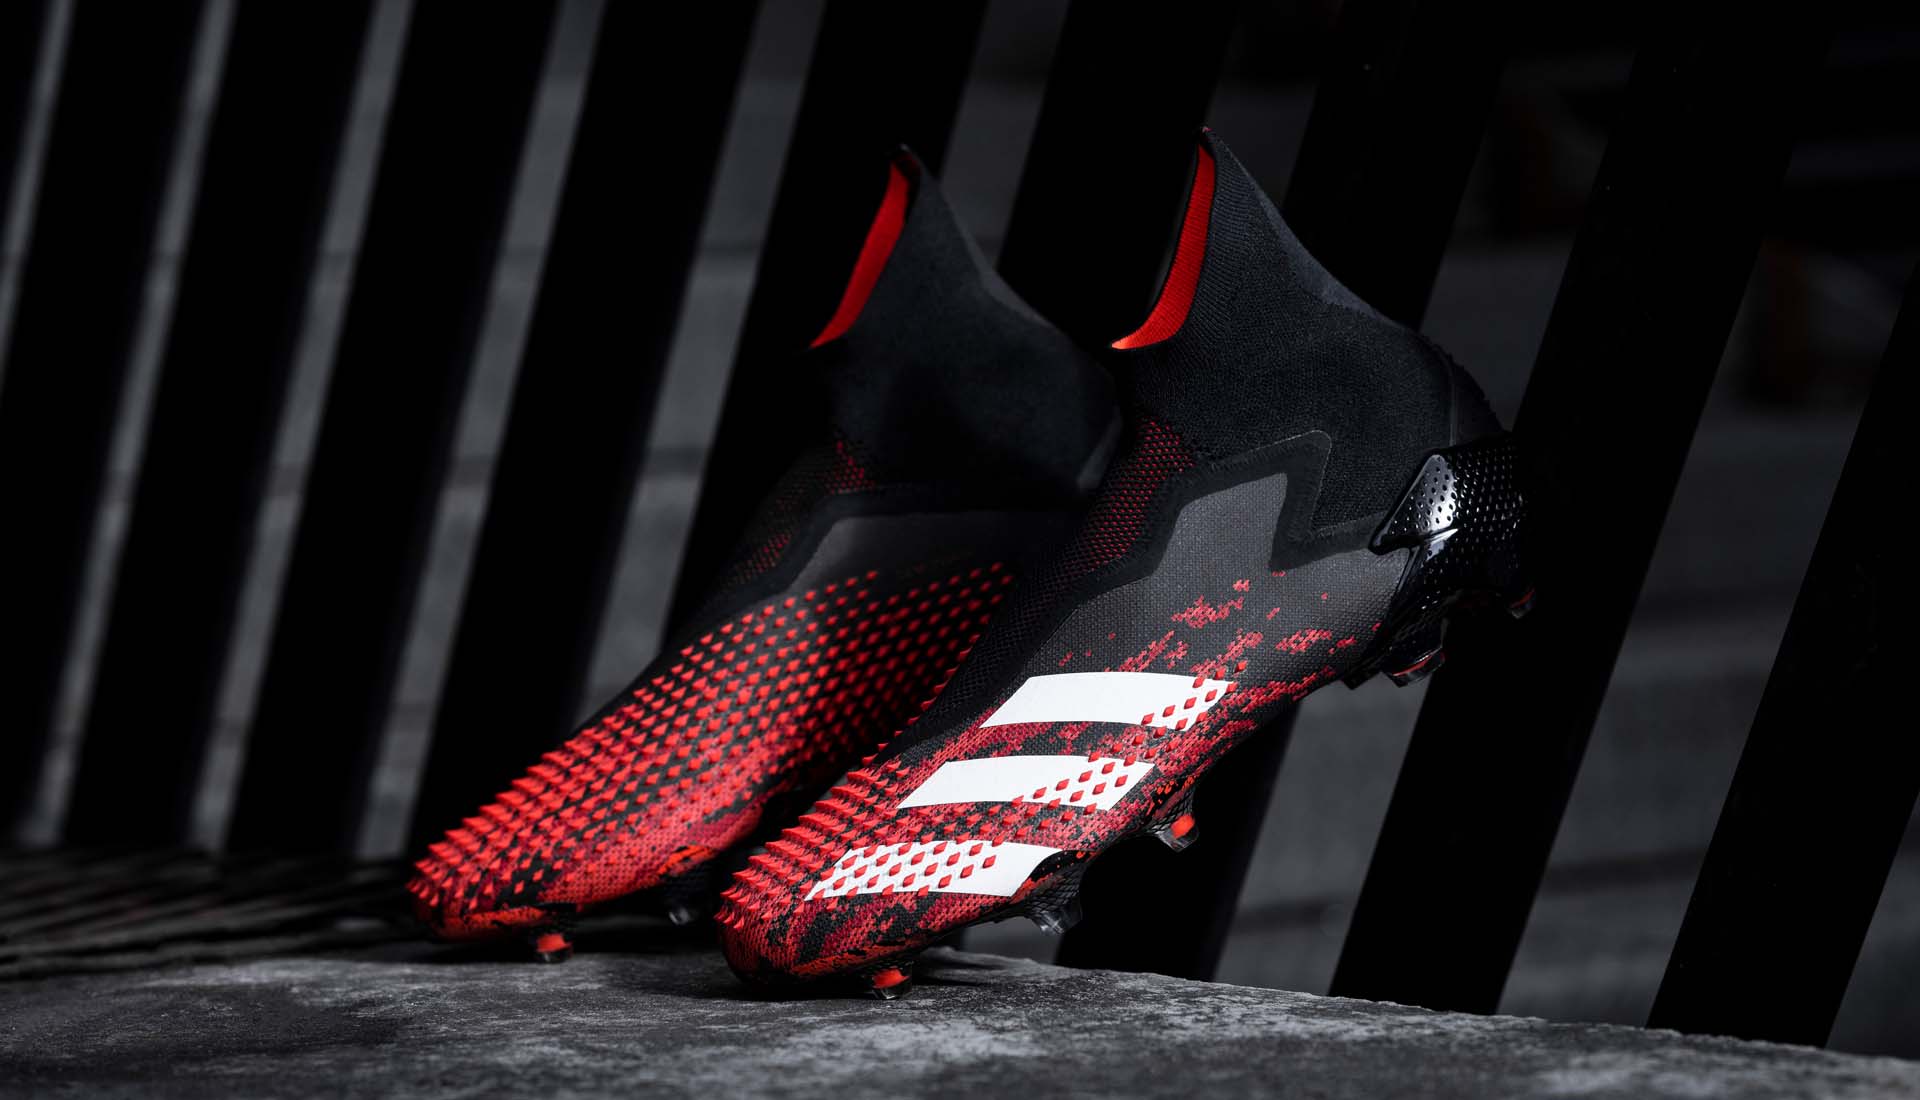 FLAME WARRIOR: Ex-Liverpool Star Fabinho Teams Up with Adidas, Unveils Super Boots in Predator 20+ Photoshoot